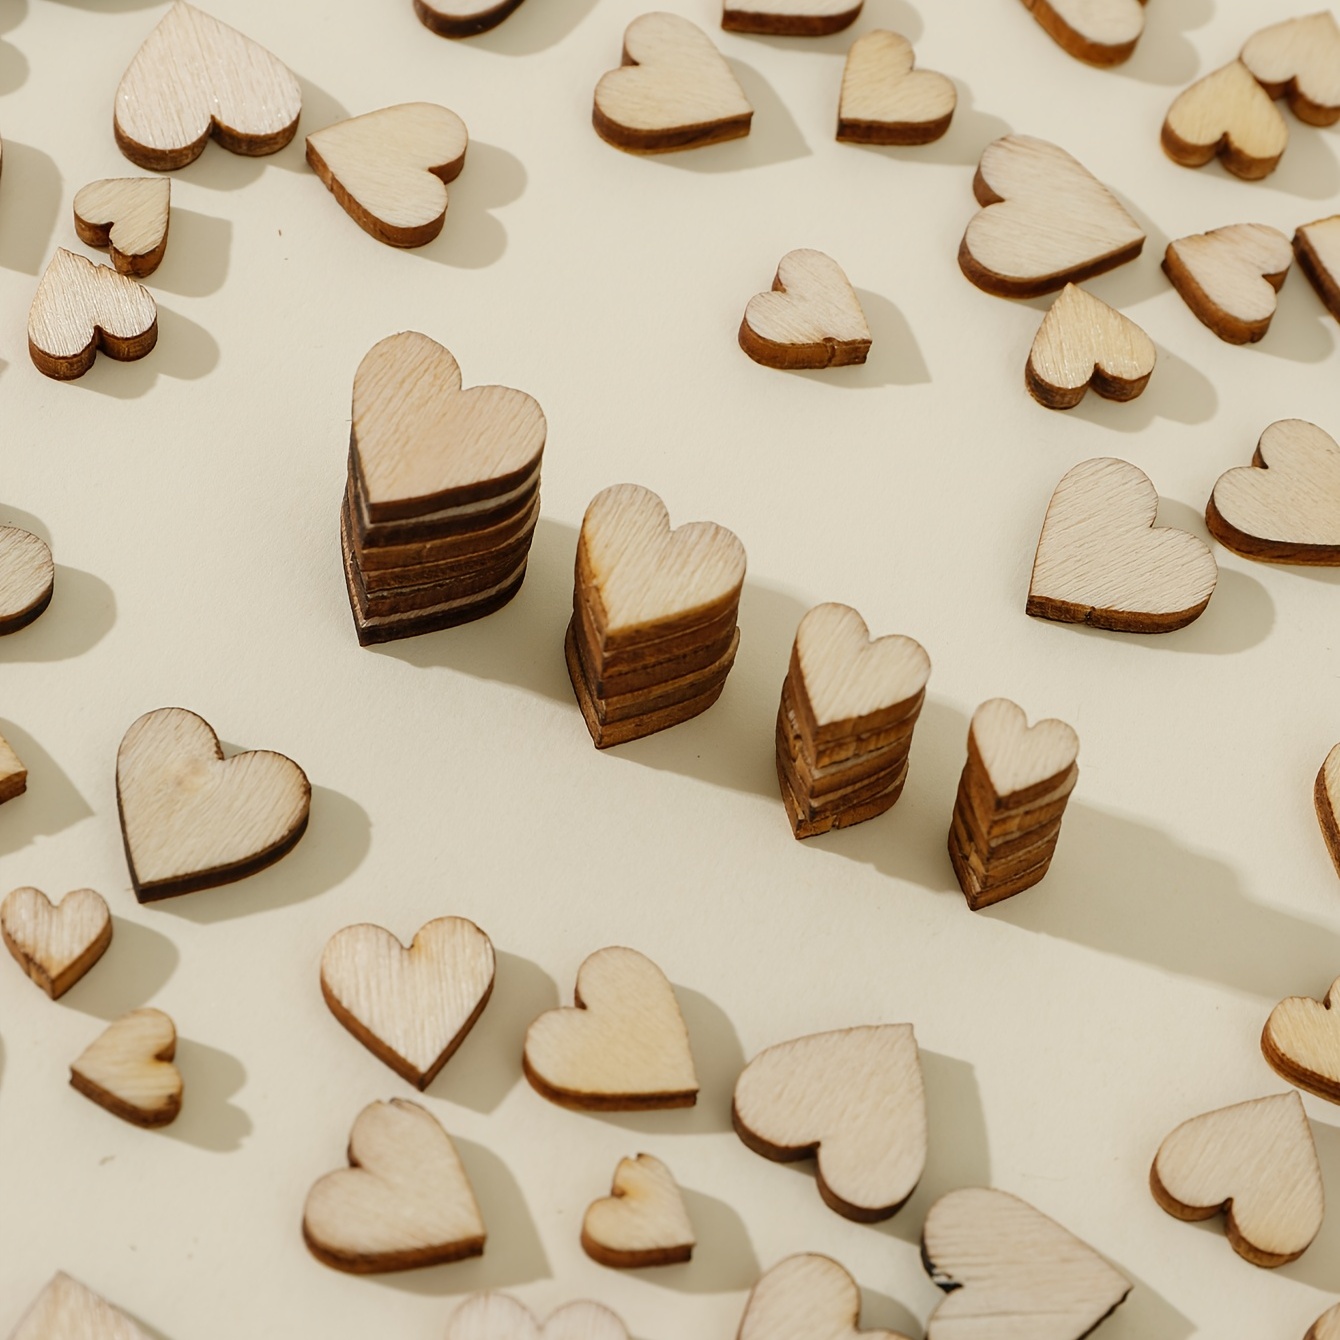  100PCS Wooden Heart, 1.1 Small Wooden Hearts For